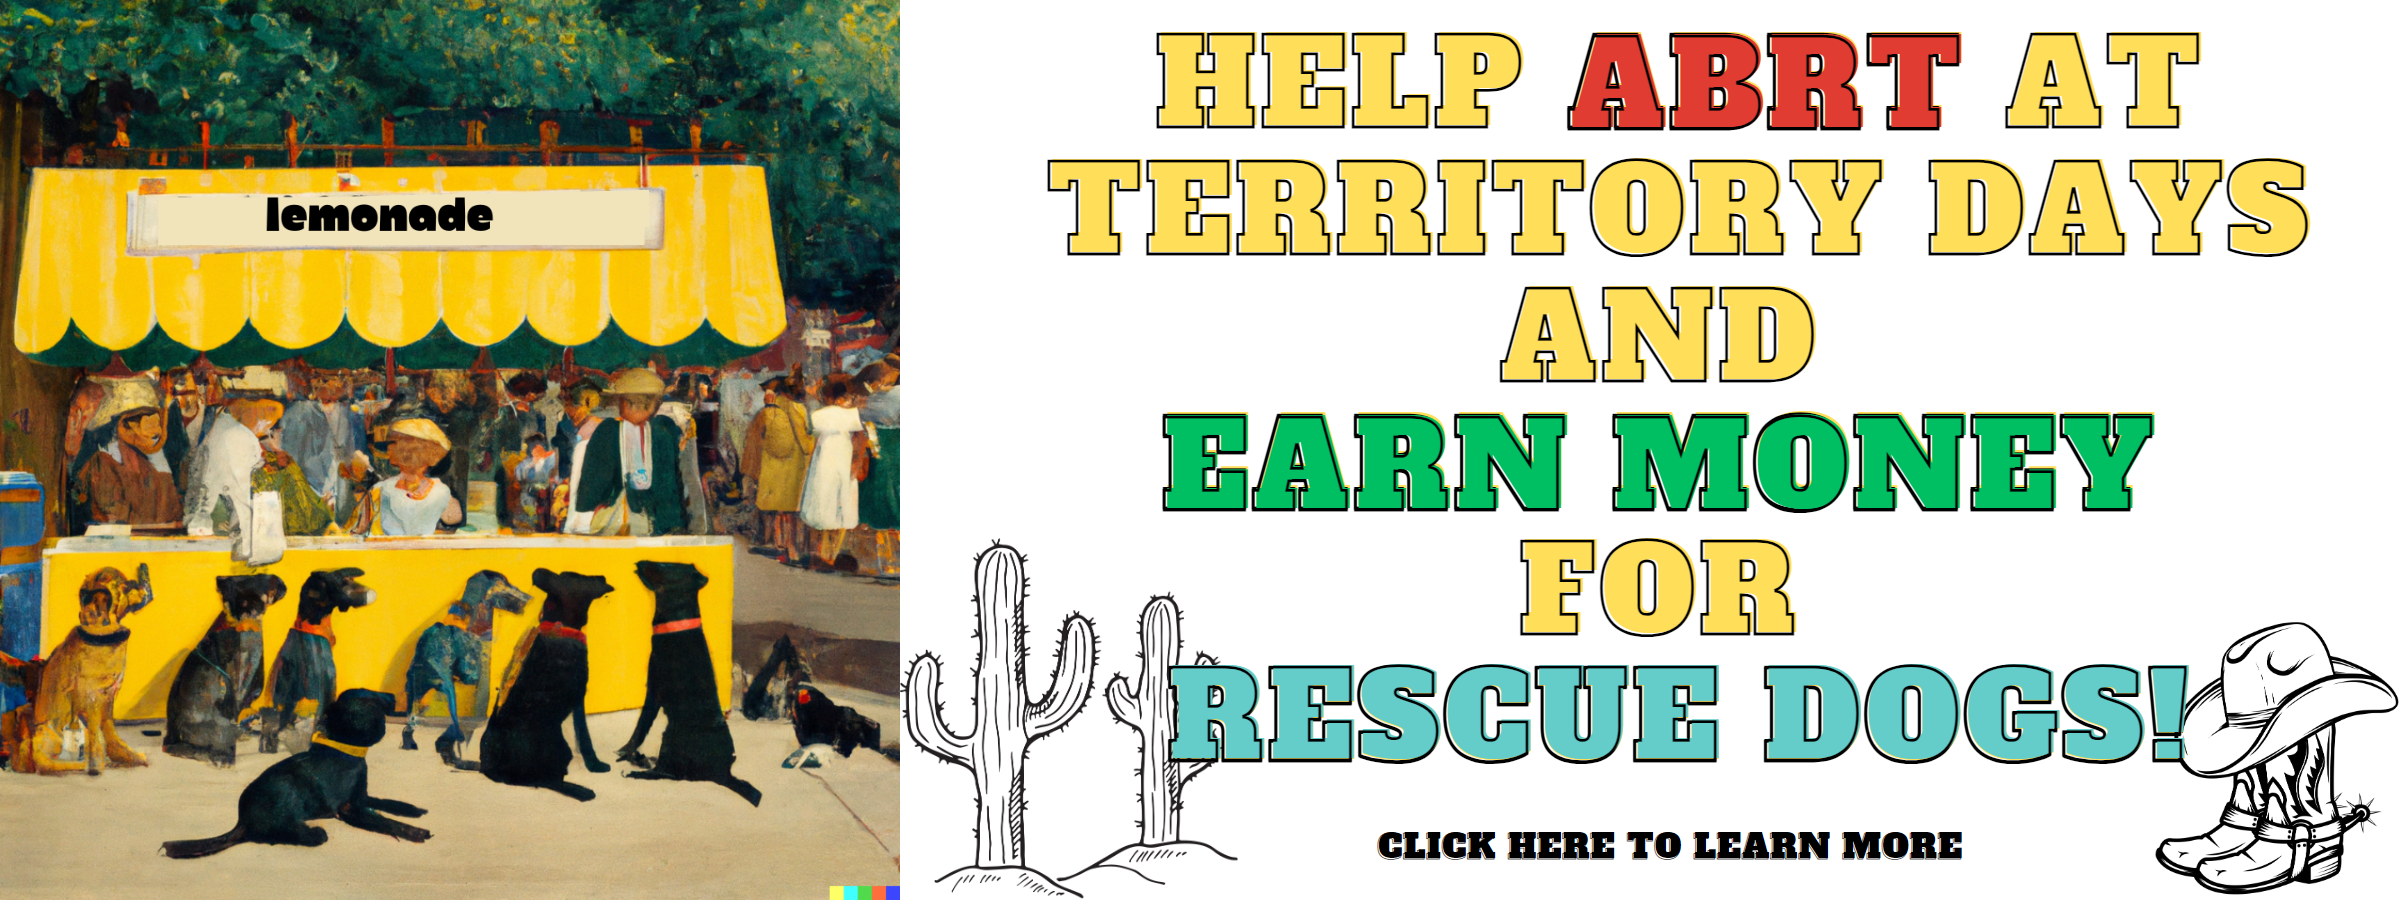 Earn money for rescue dogs by selling lemonade at Territory Days!